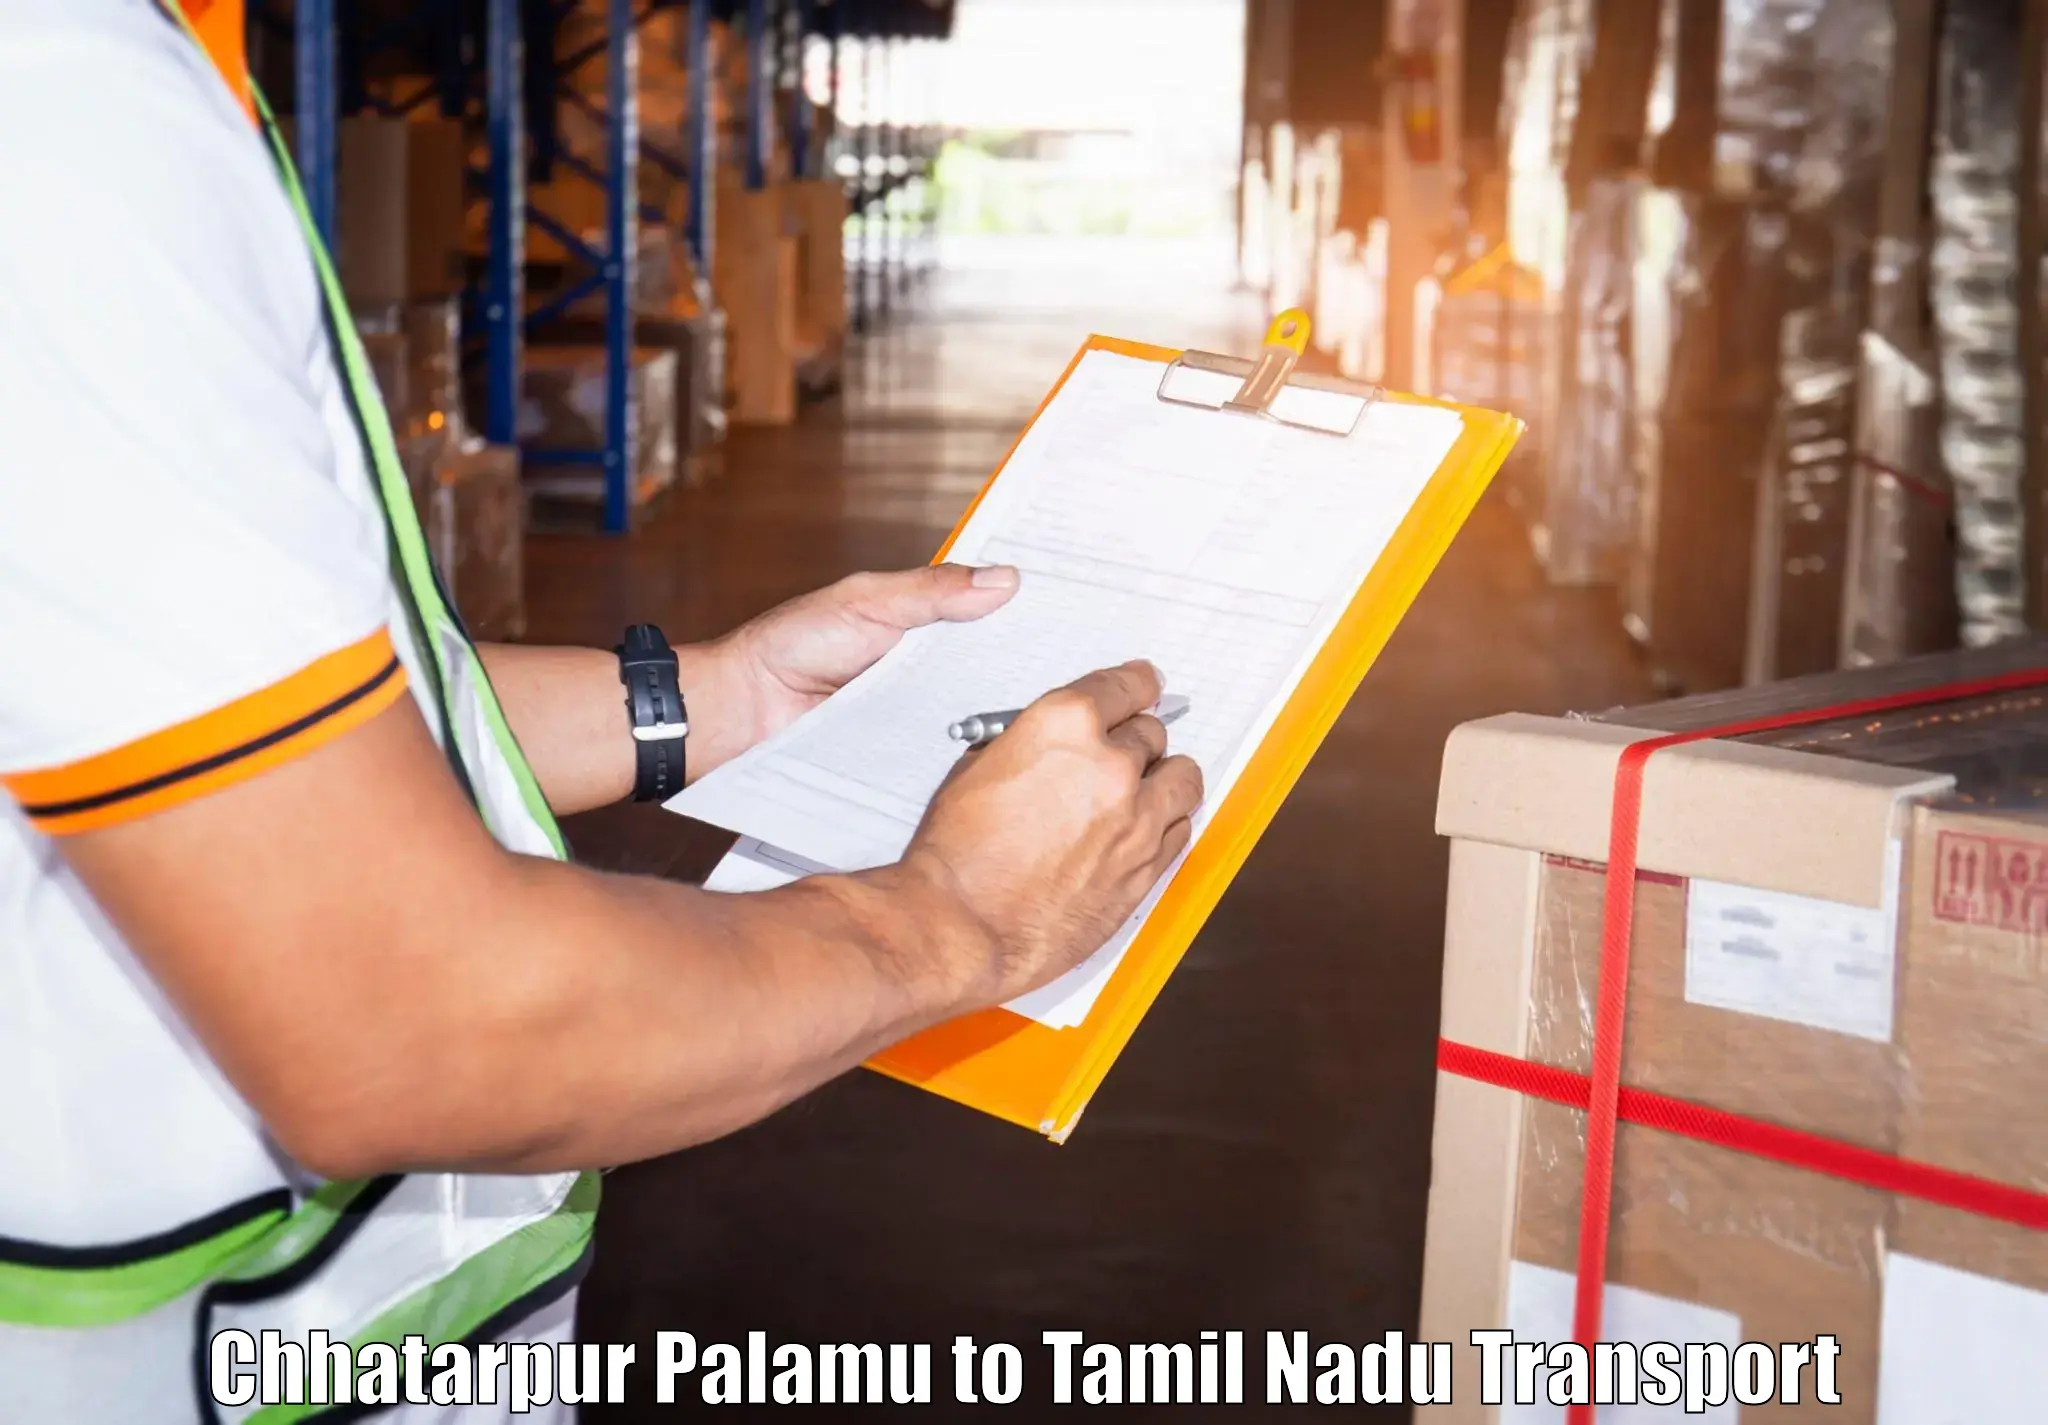 Package delivery services Chhatarpur Palamu to Srivaikuntam